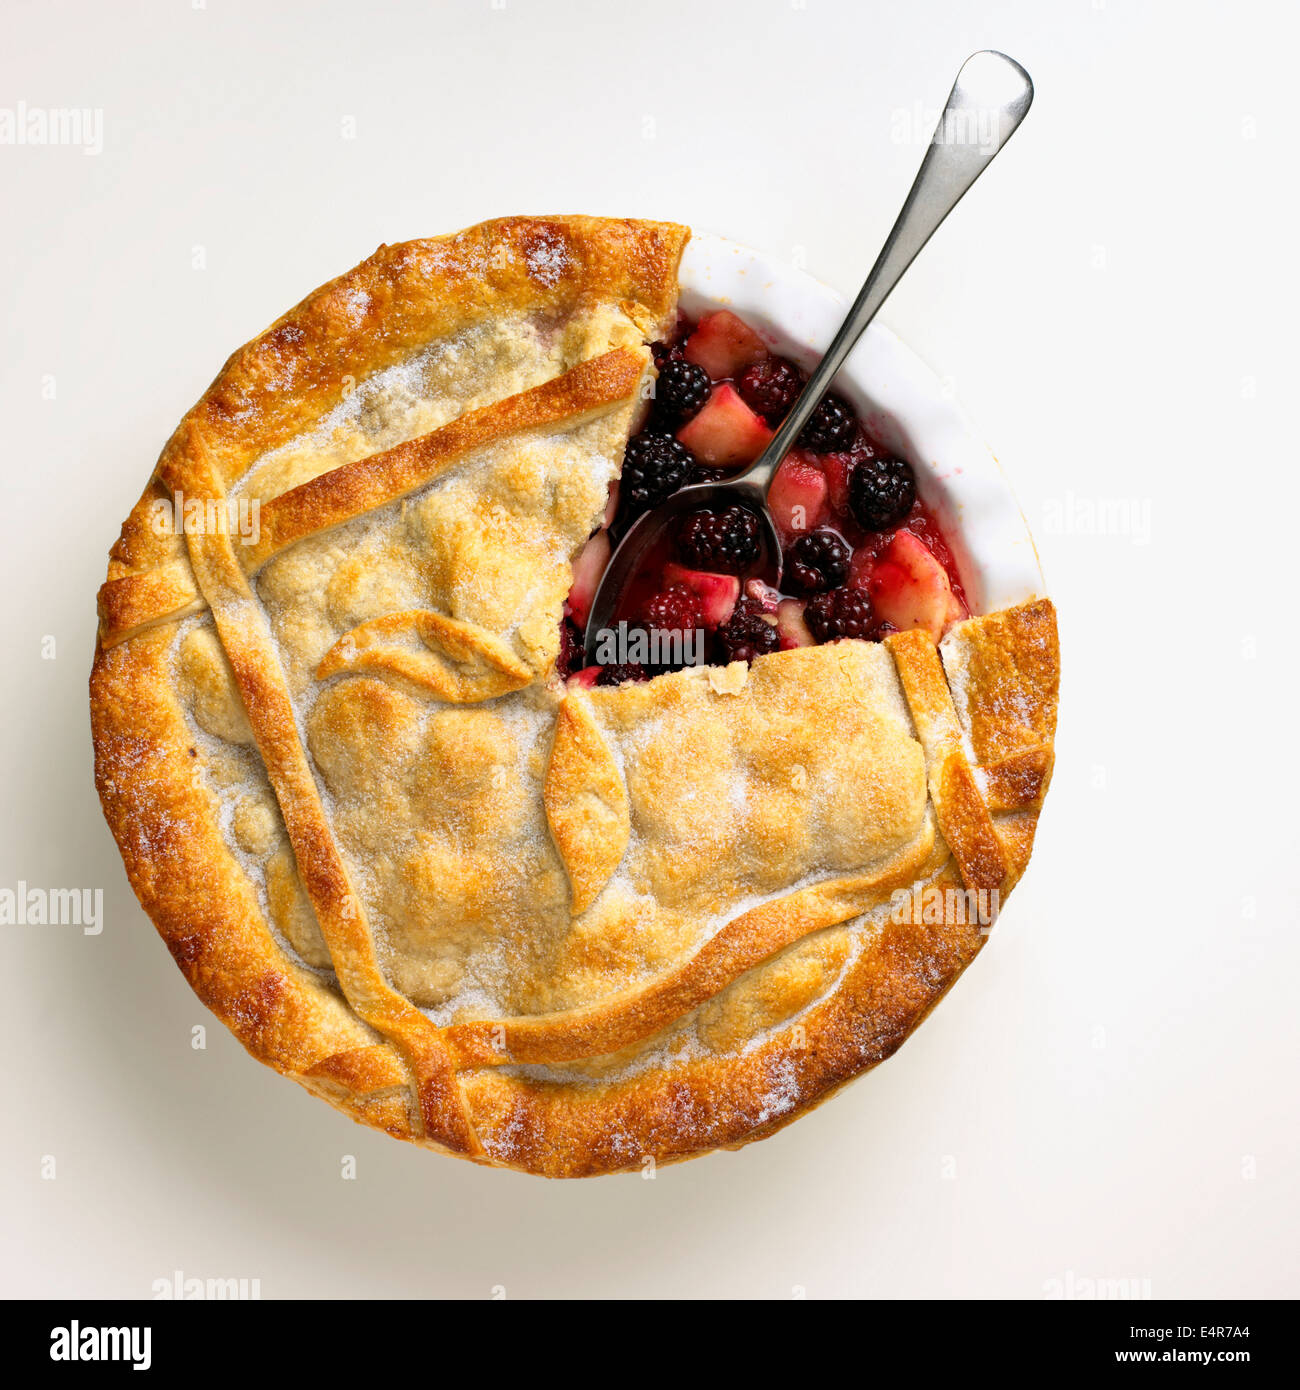 Blackberry and apple pie with part of crust removed Stock Photo